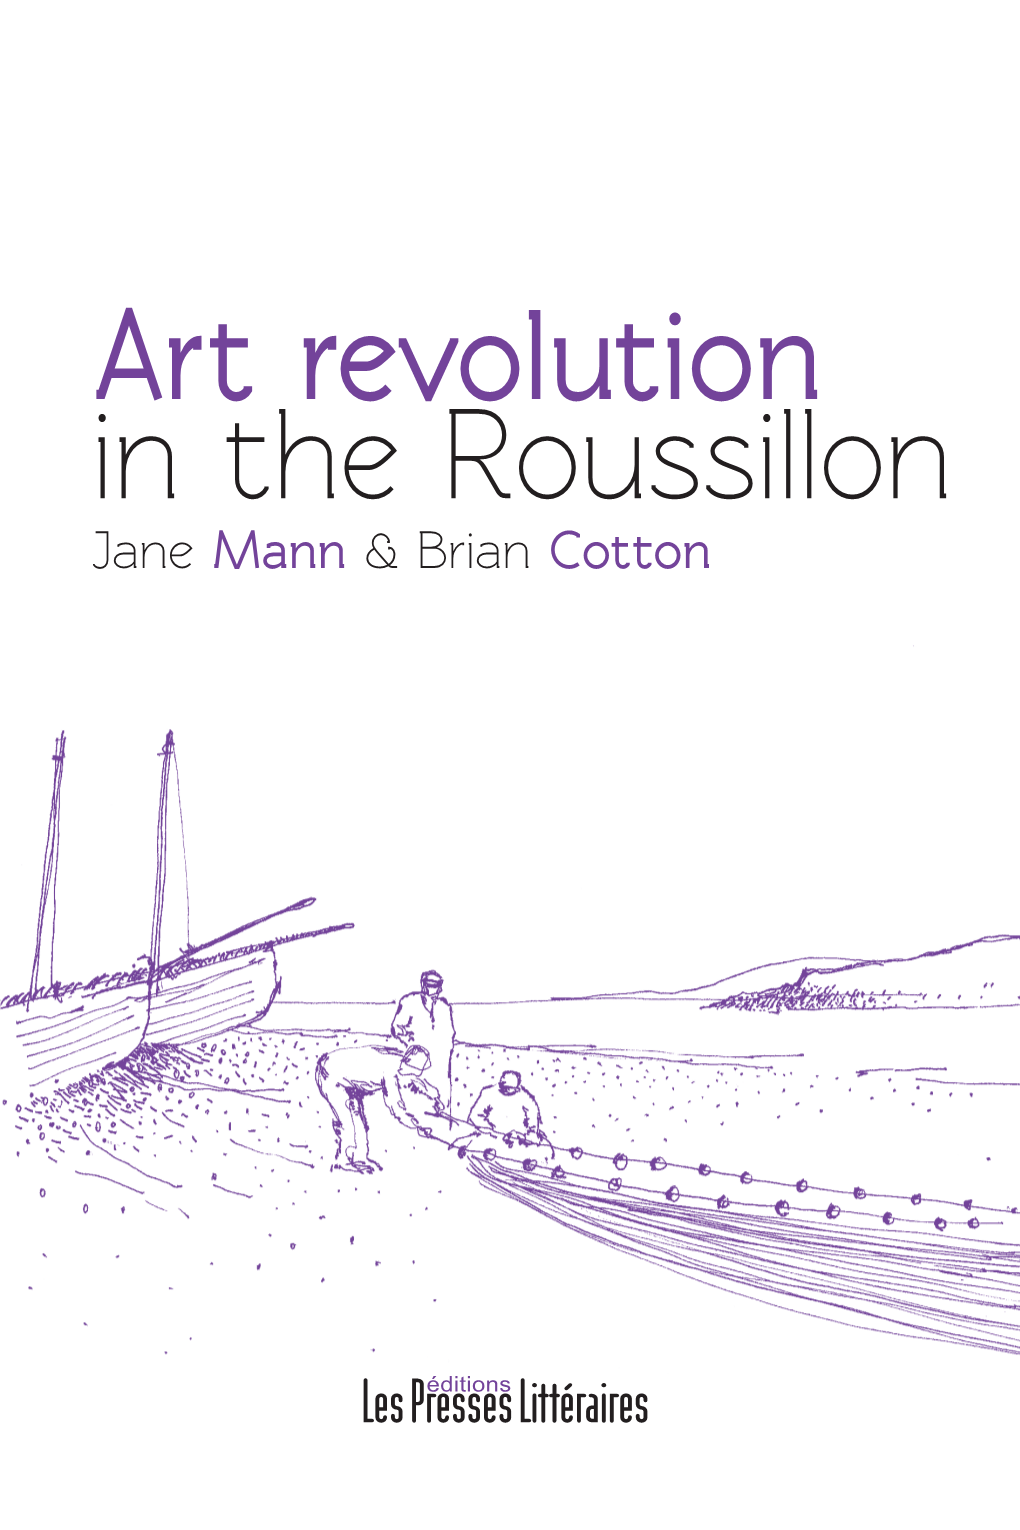 Art Revolution in the Roussillon Jane Mann & Brian Cotton Jojo Pous with the Livre D’Or, Dufy Page